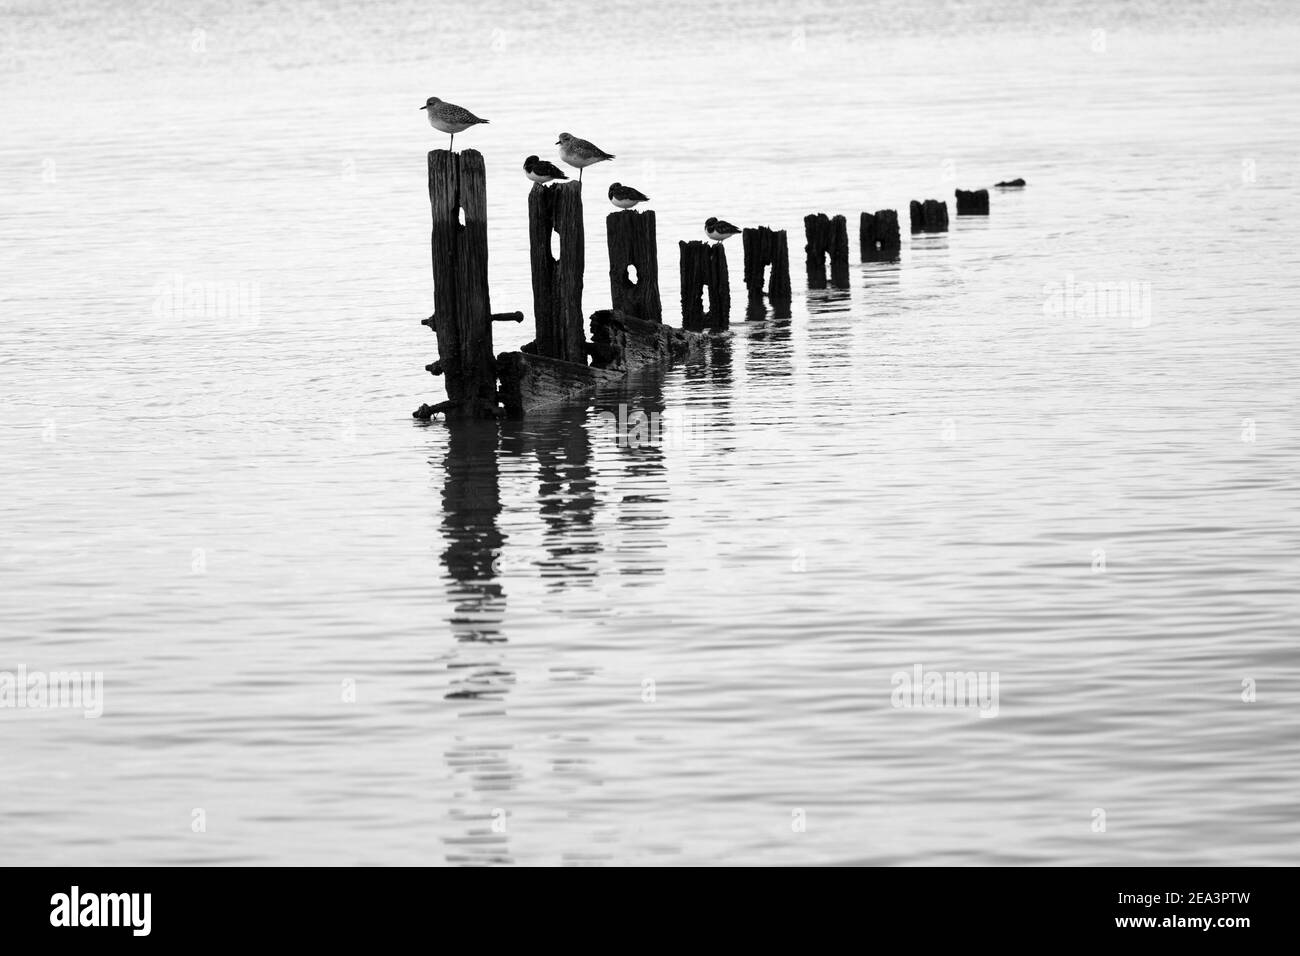 Turnstones and grey plovers perched on the remains of old groynes reflected in calm water. Stock Photo